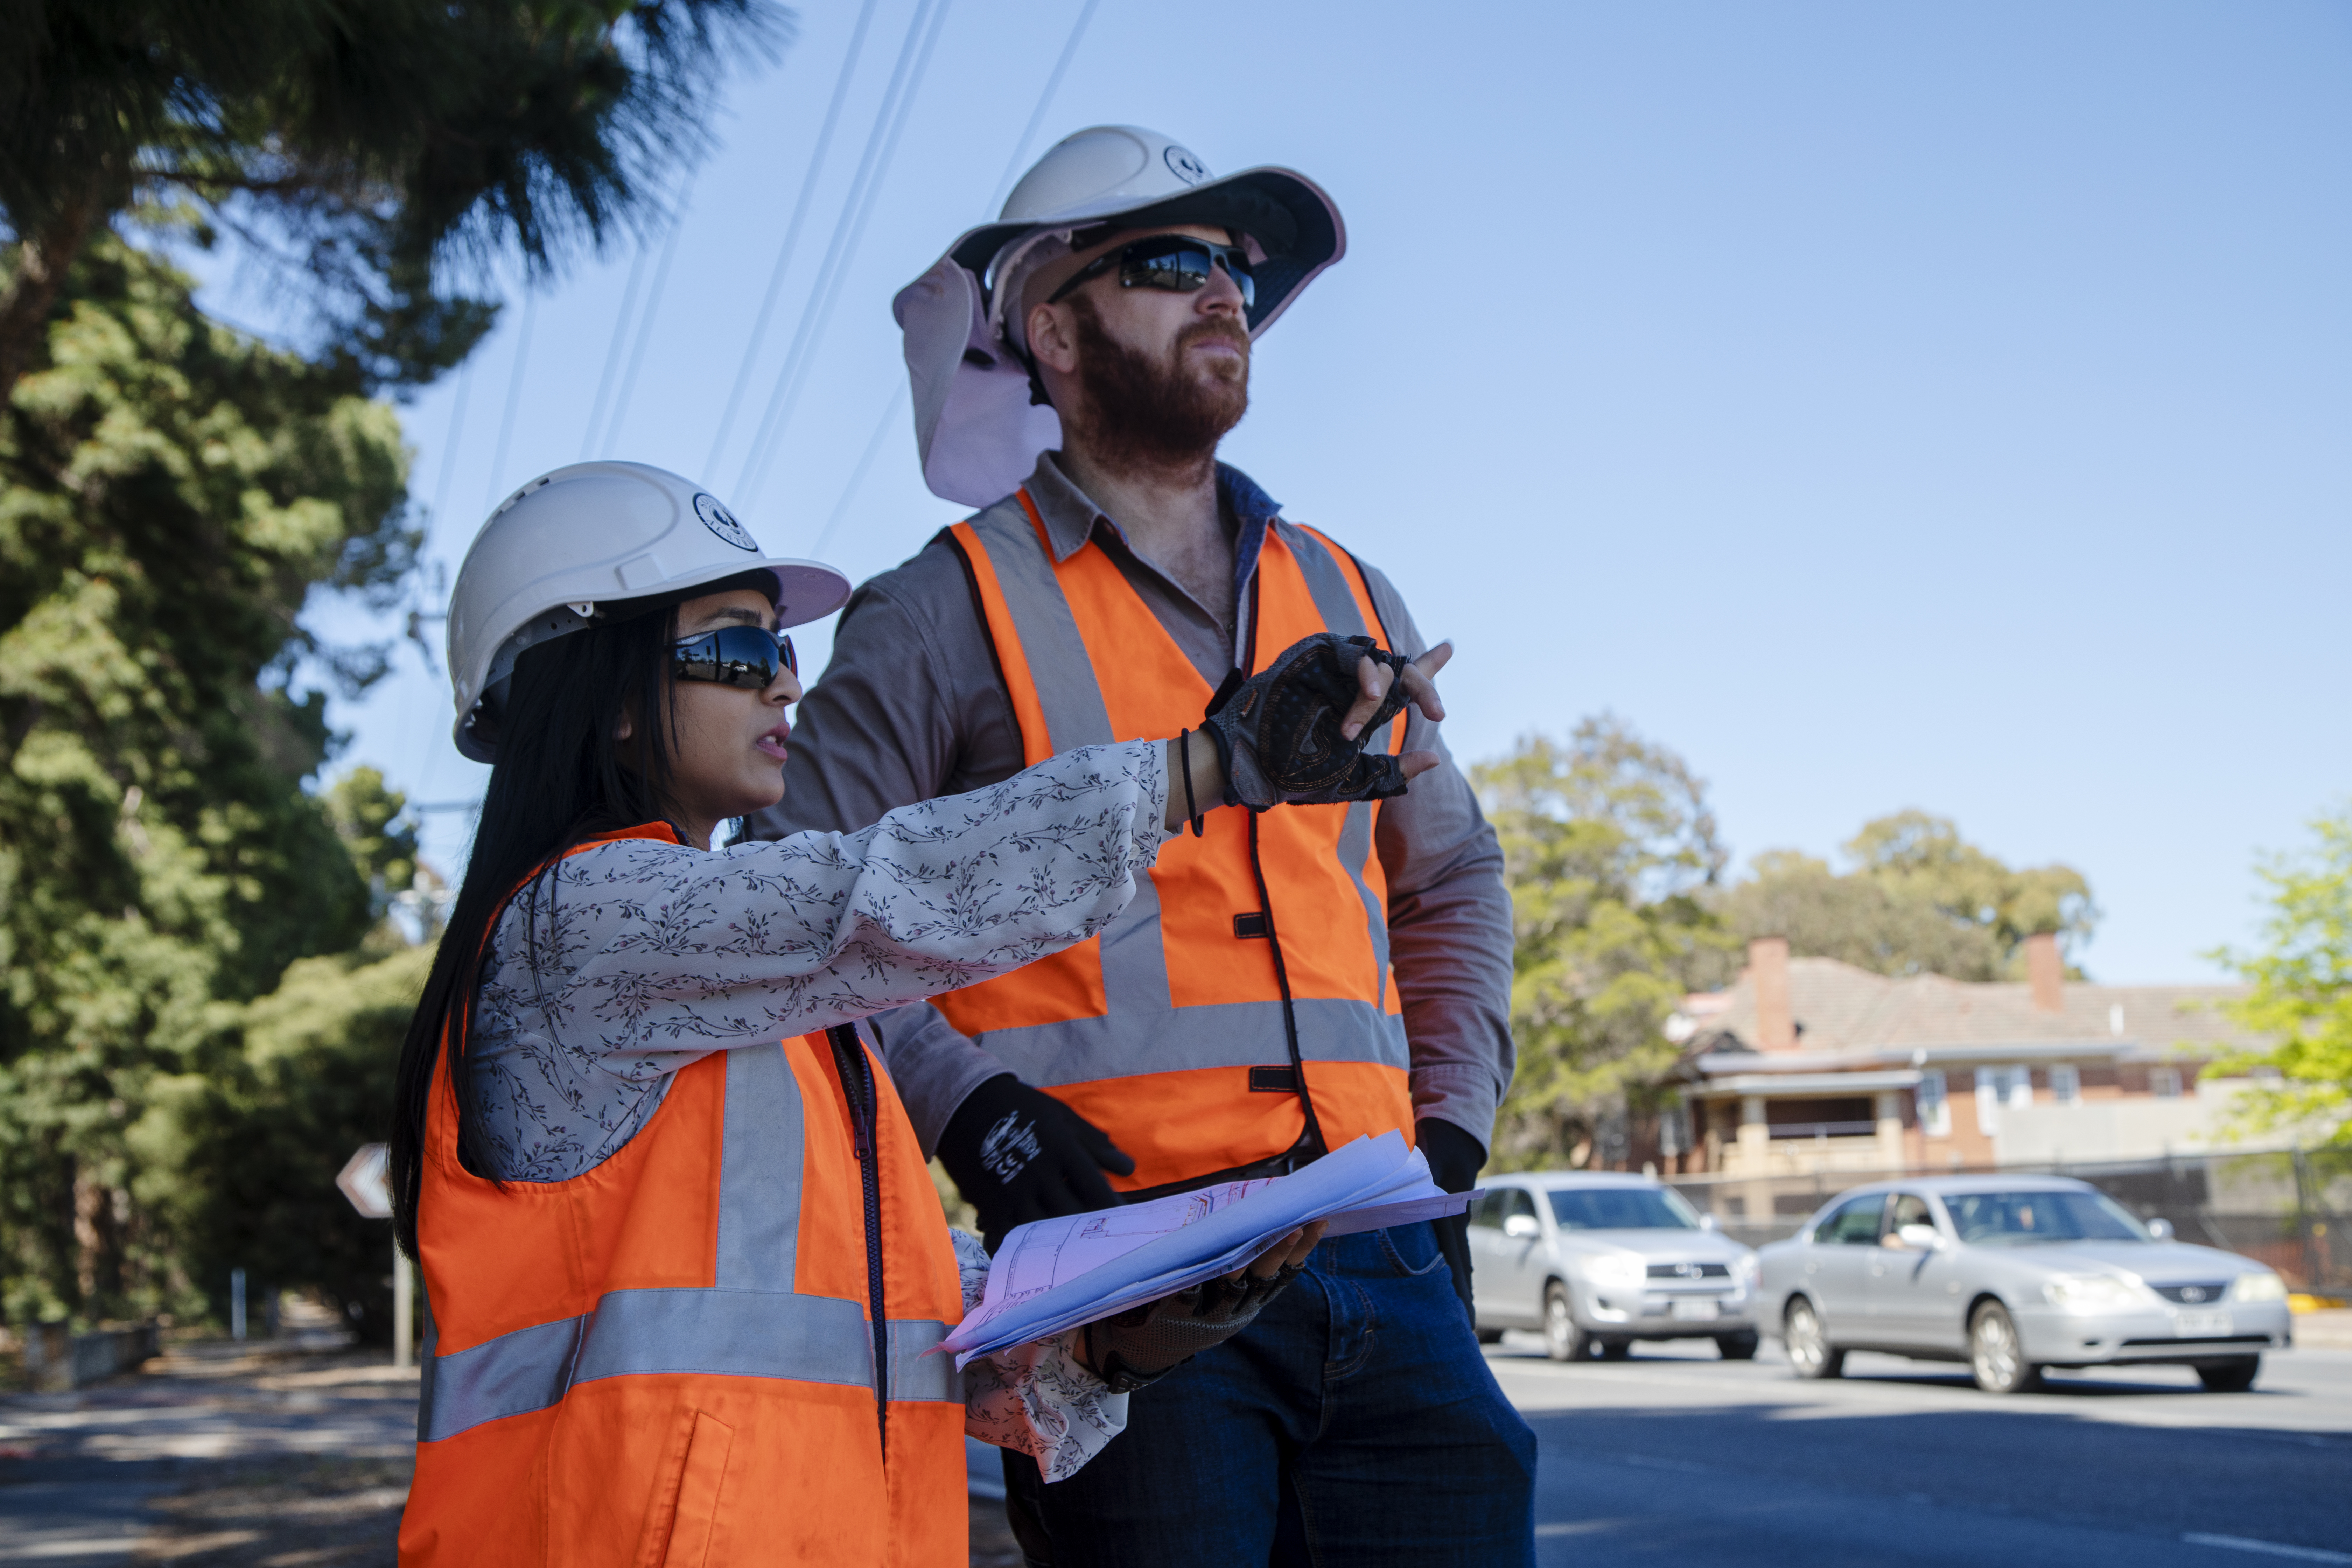 Vini is wearing an orange high vis vest, black sunglasses and a white safety helmet. She is standing next to a man with a beard who is also wearing an orange vest and white helmet. Vini is holding paperwork and pointing into the distance